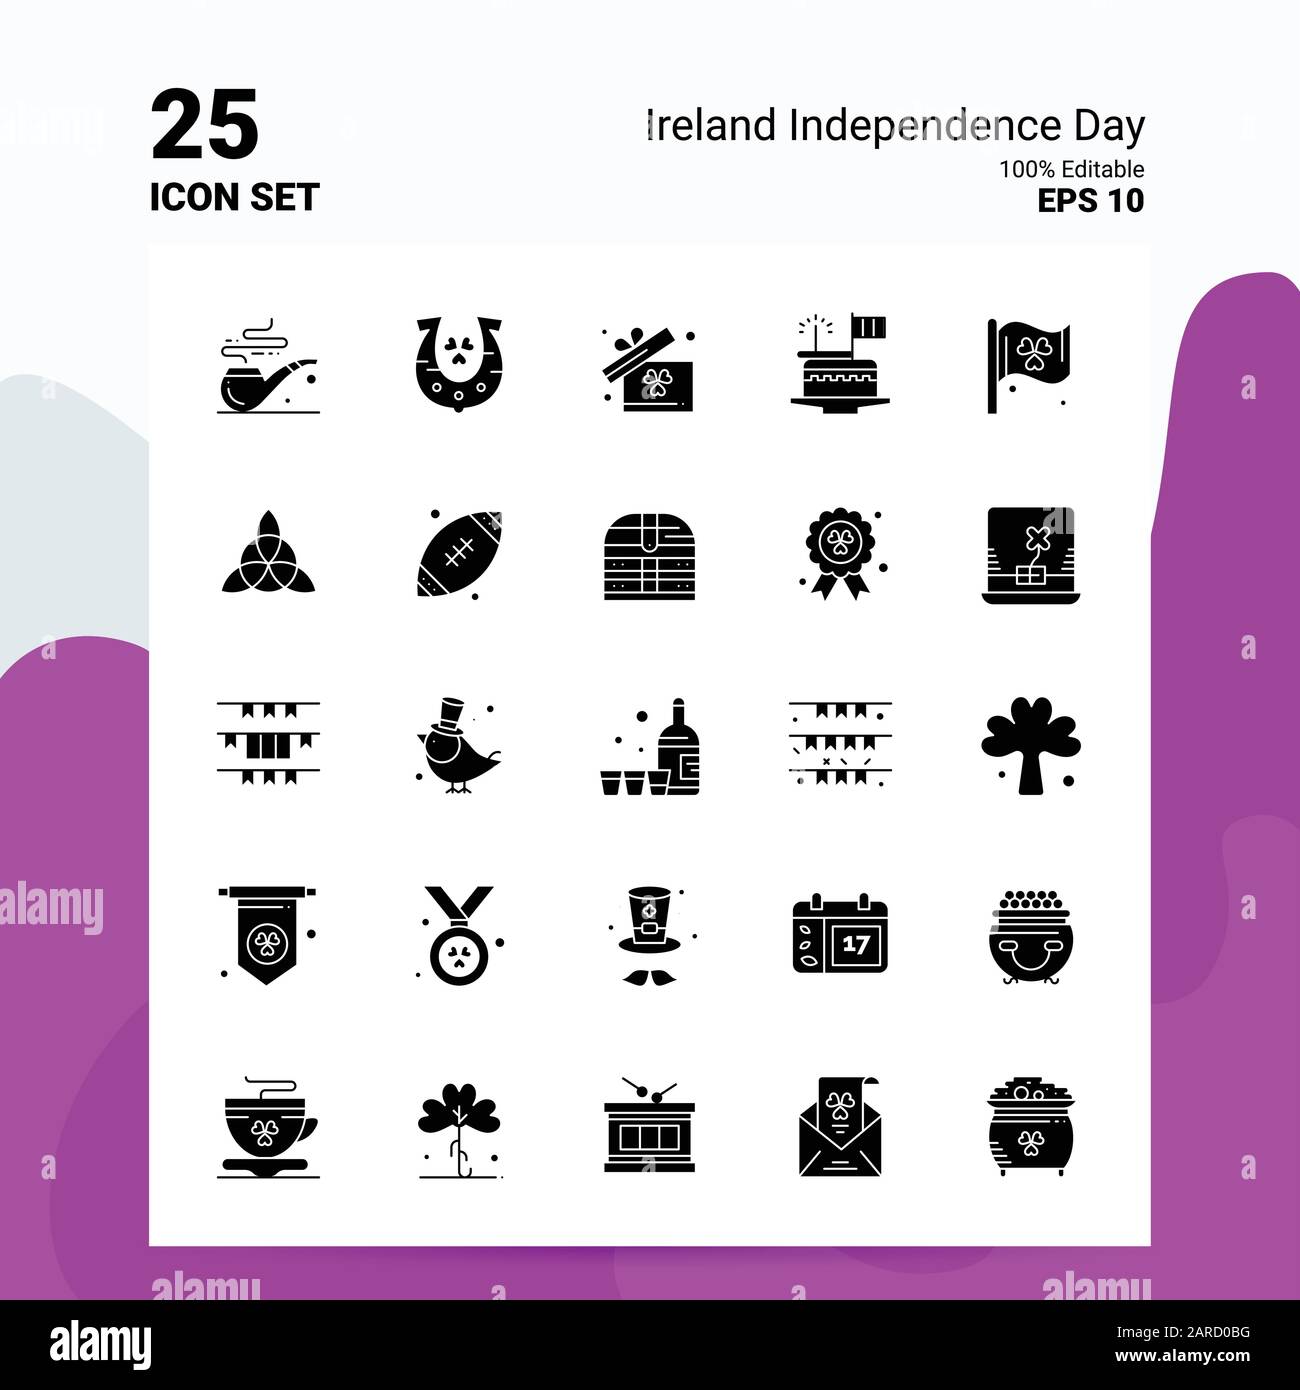 25 Ireland Independence Day Icon Set. 100% Editable EPS 10 Files. Business Logo Concept Ideas Solid Glyph icon design Stock Vector